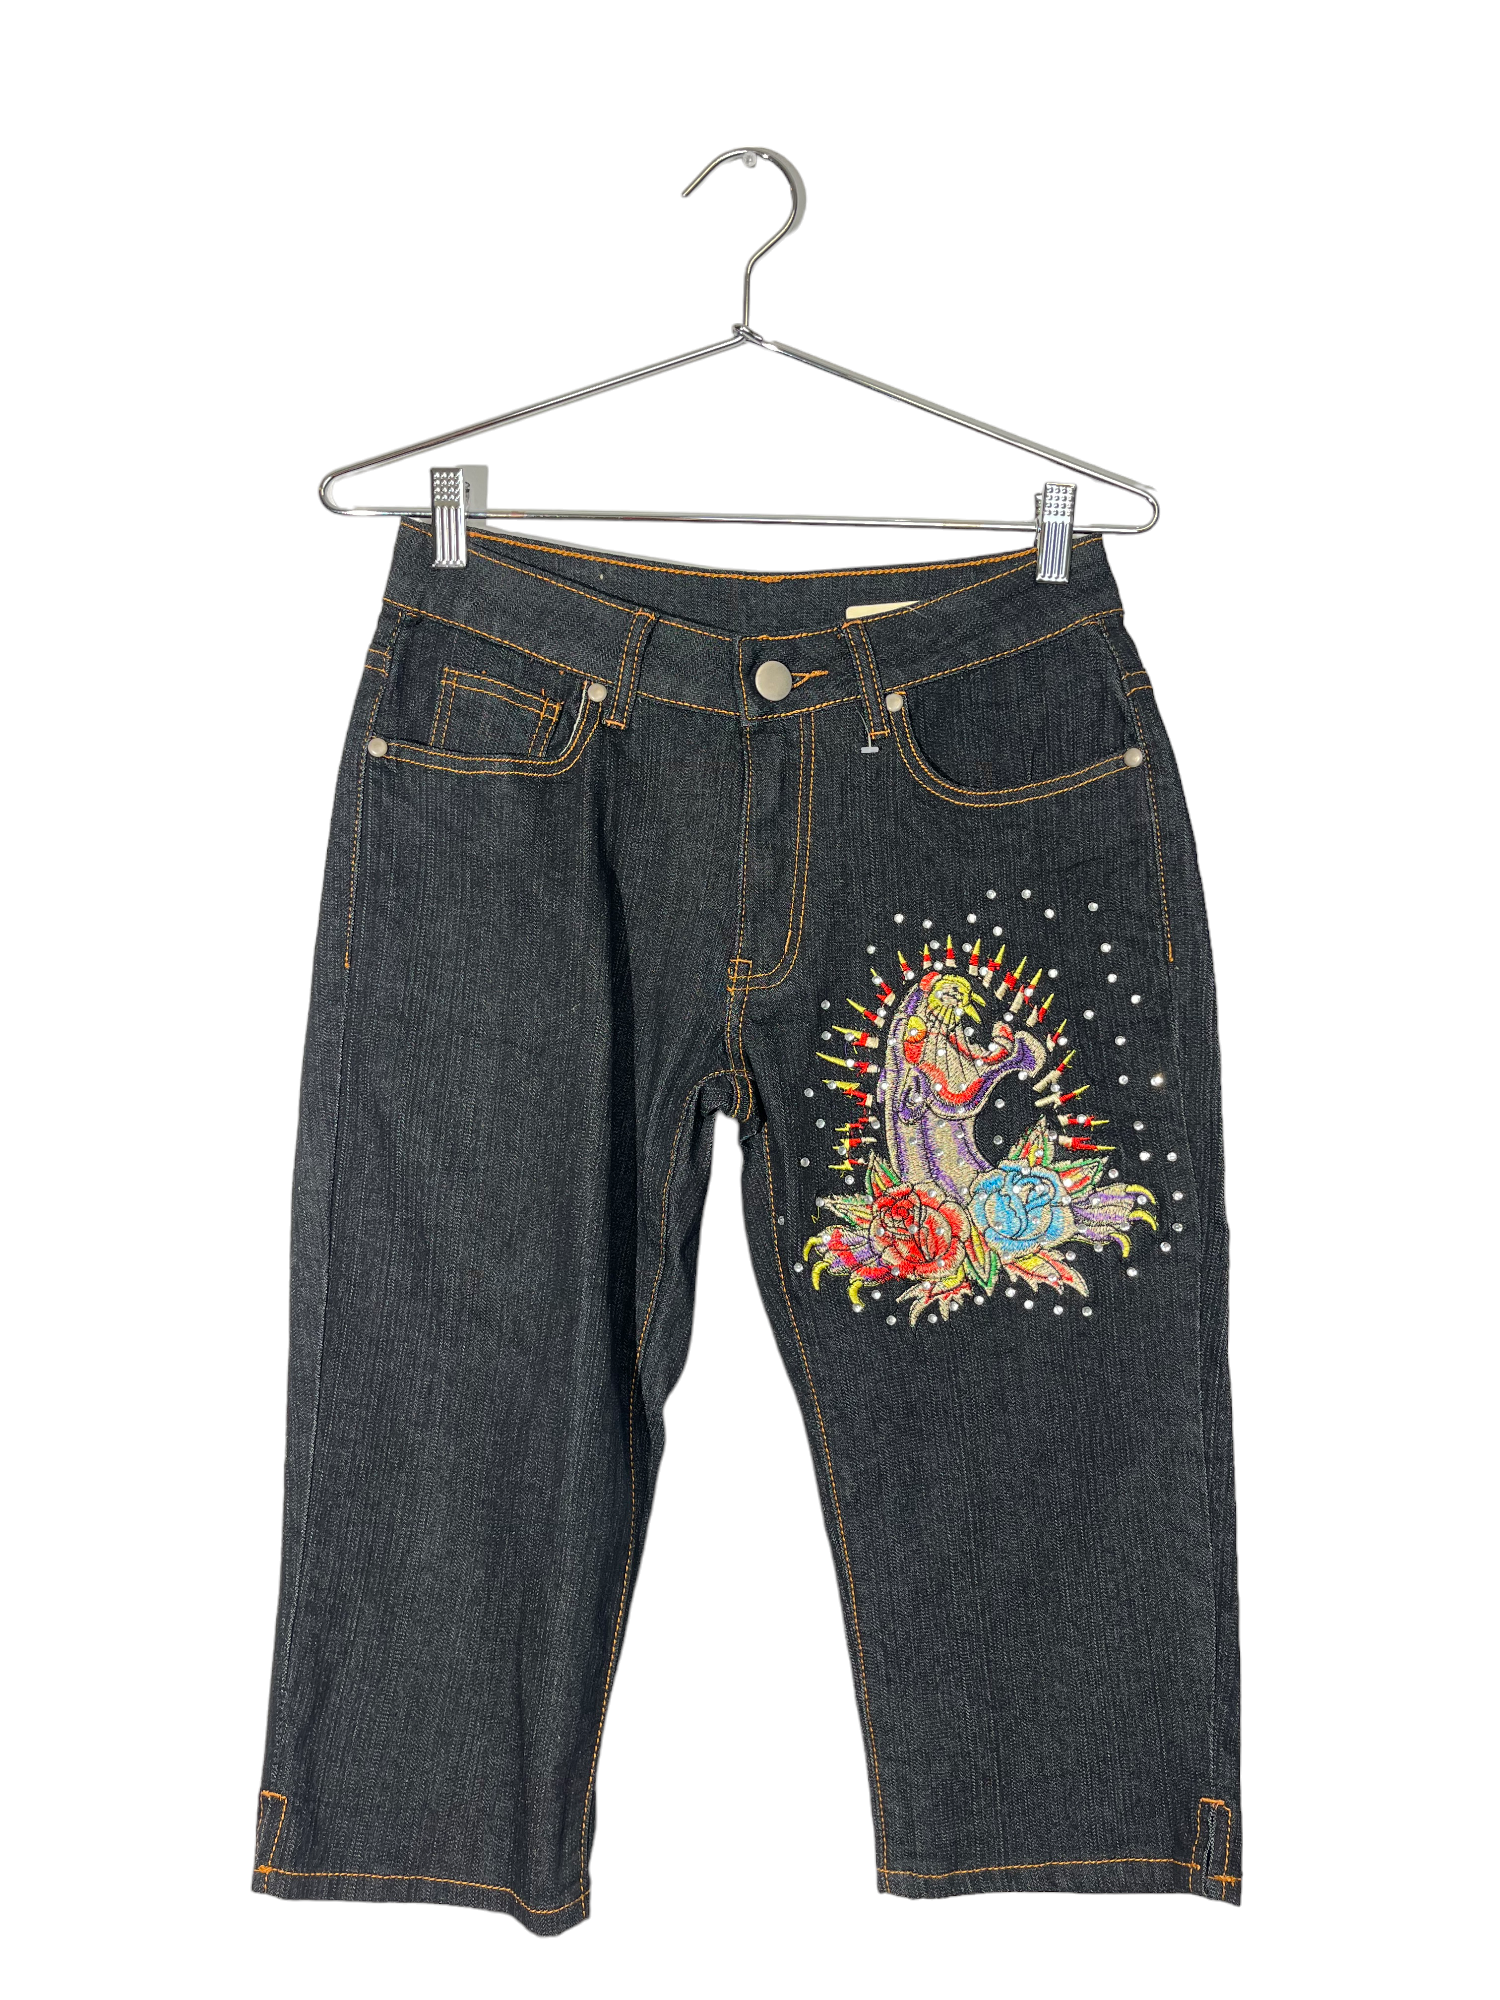 Denim Capris with Bedazzle & Embroidery